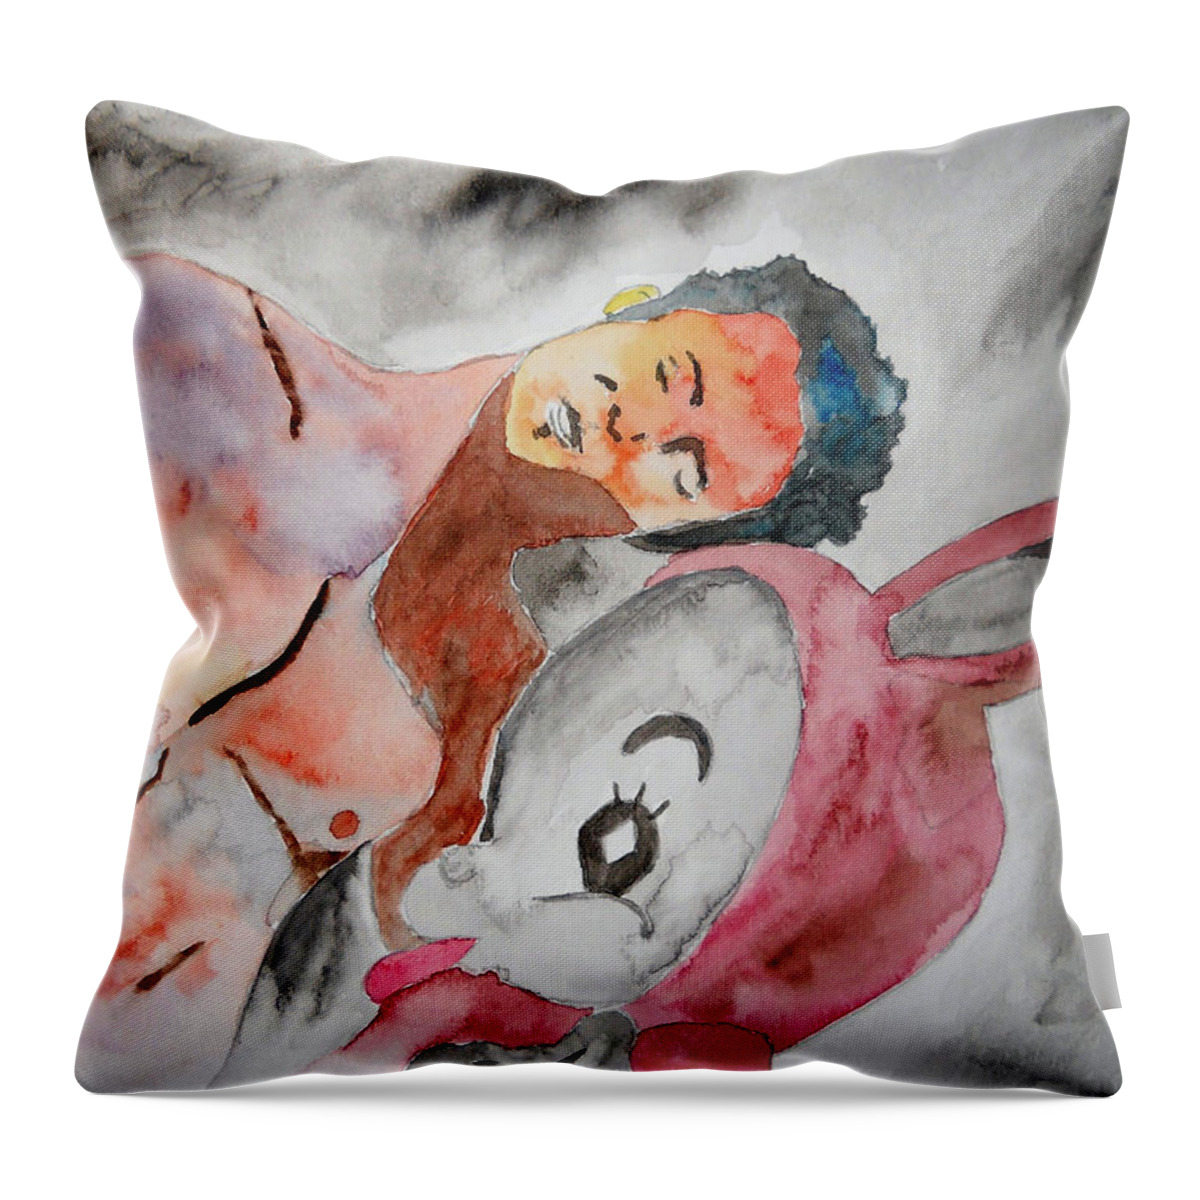 Scott Weiland Throw Pillow featuring the painting Scott Weiland - Stone Temple Pilots - Music Inspiration Series by Carol Crisafi